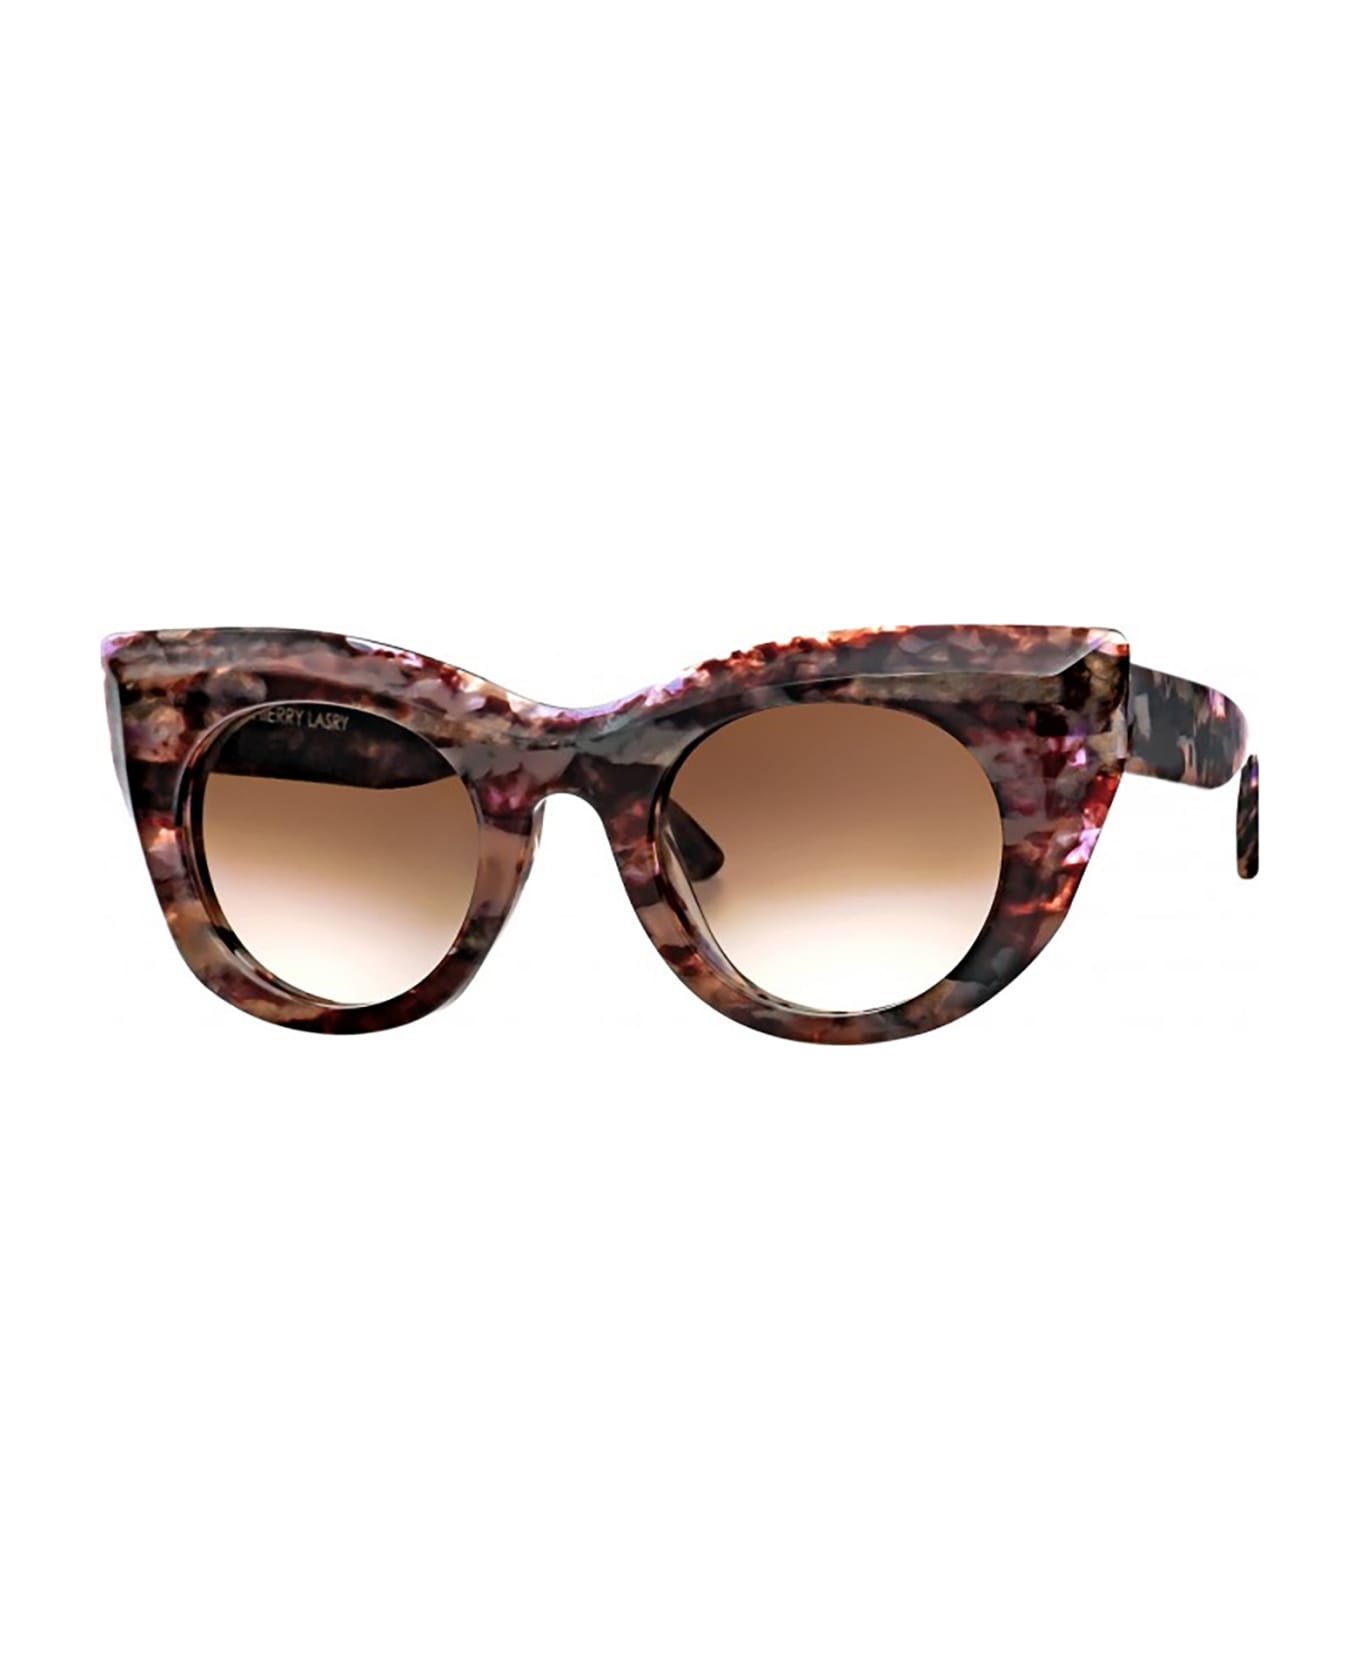 Thierry Lasry CLIMAXXXY Sunglasses サングラス